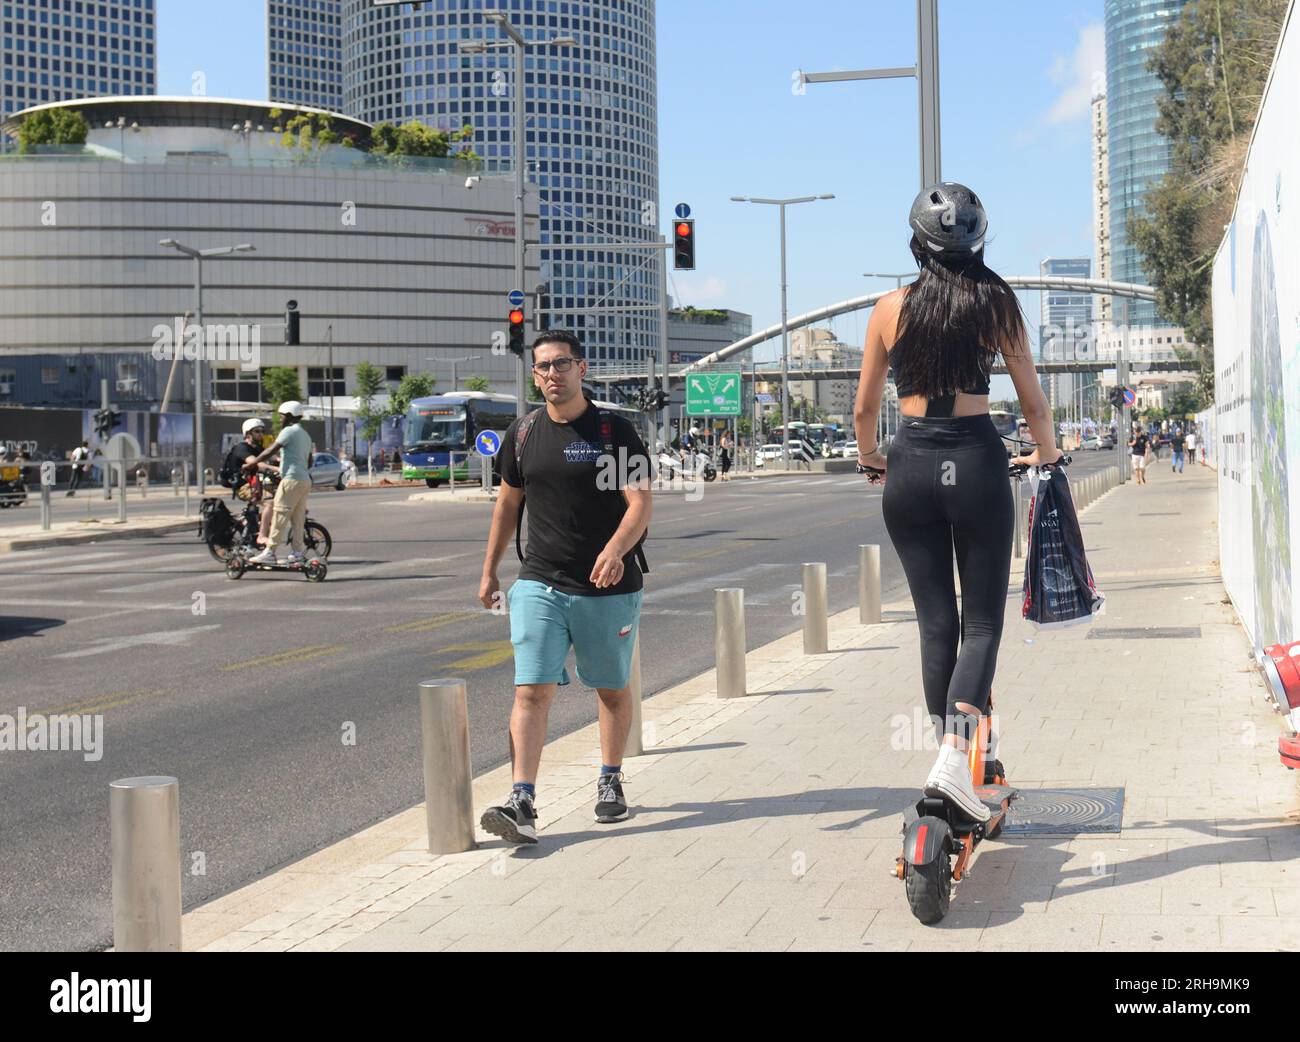 Electric scooters are a popular mode of transport in Tel-Aviv, Israel. Stock Photo